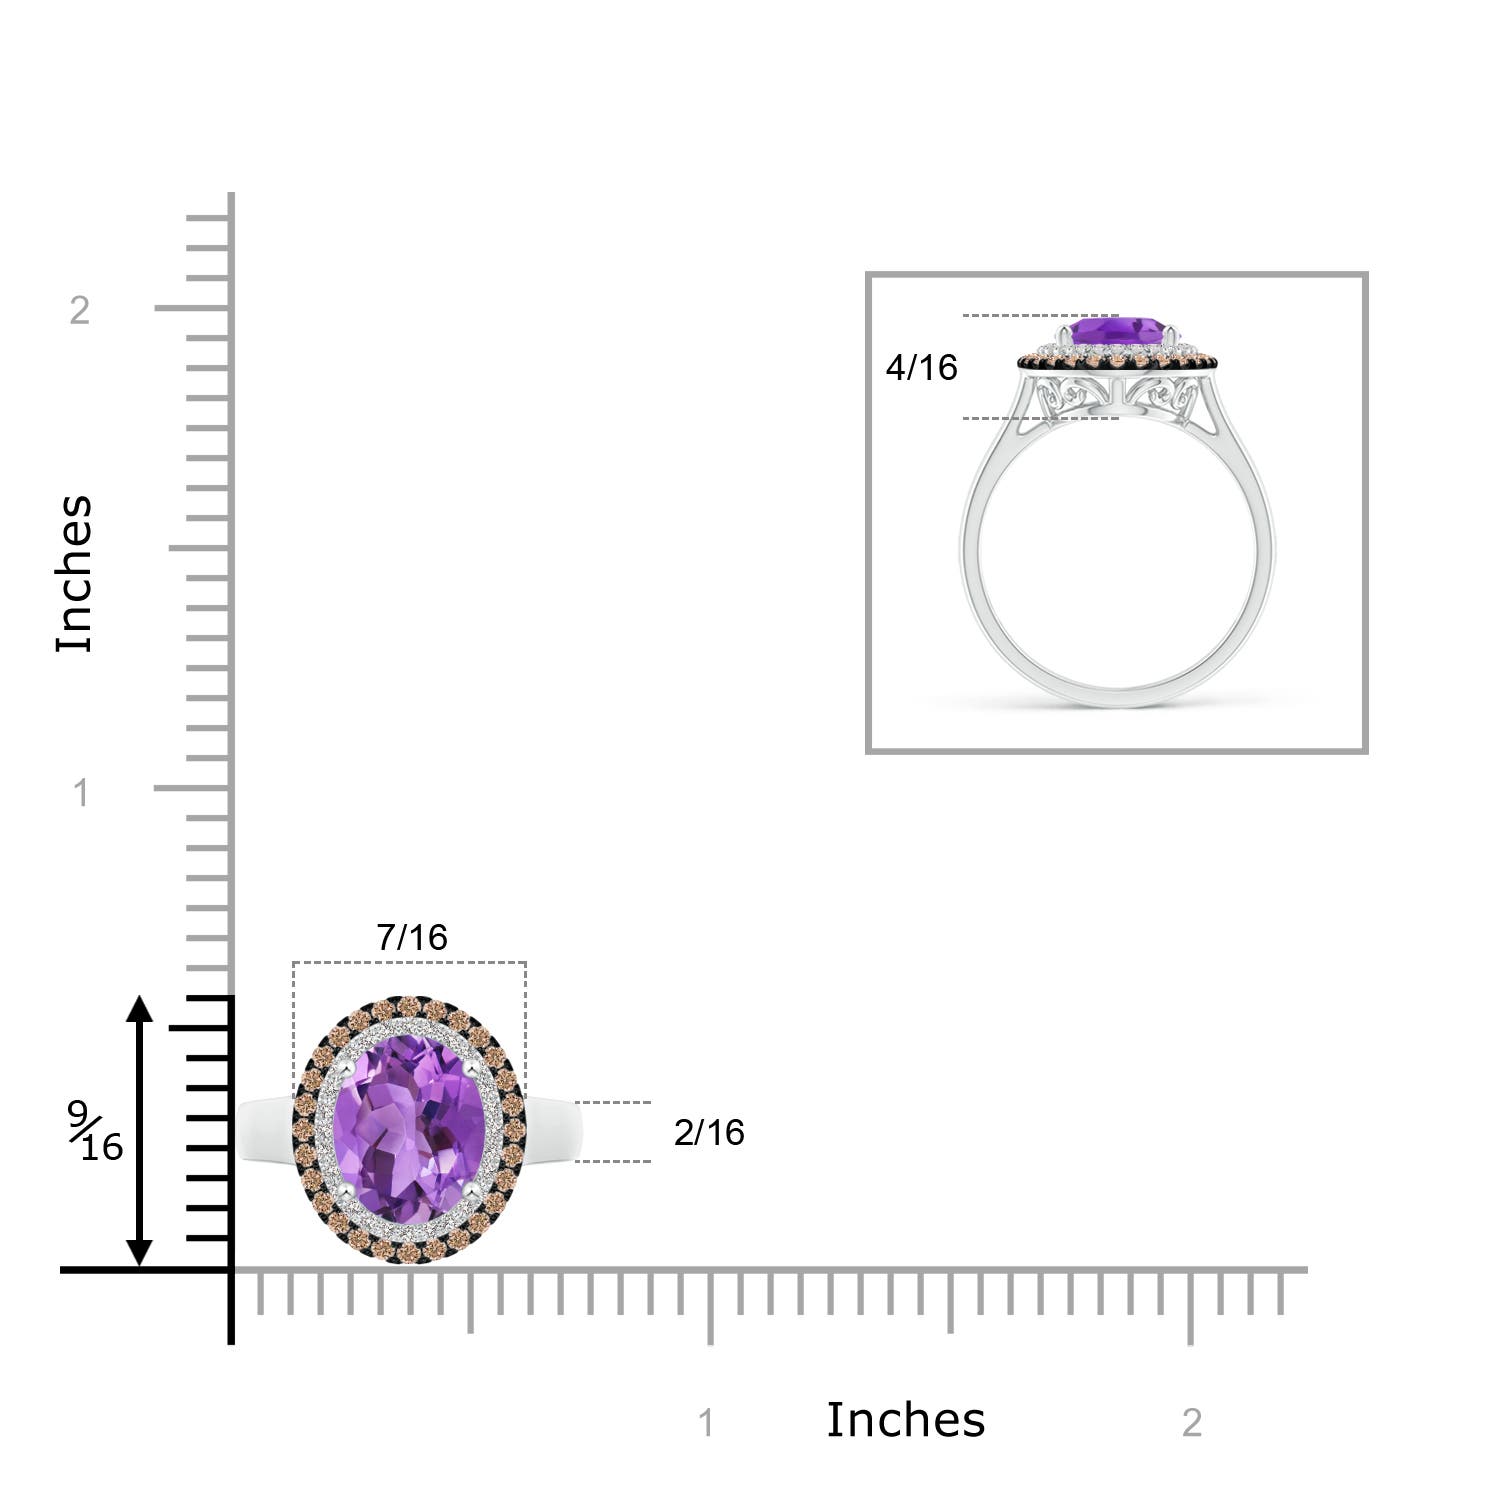 AA - Amethyst / 1.87 CT / 14 KT White Gold